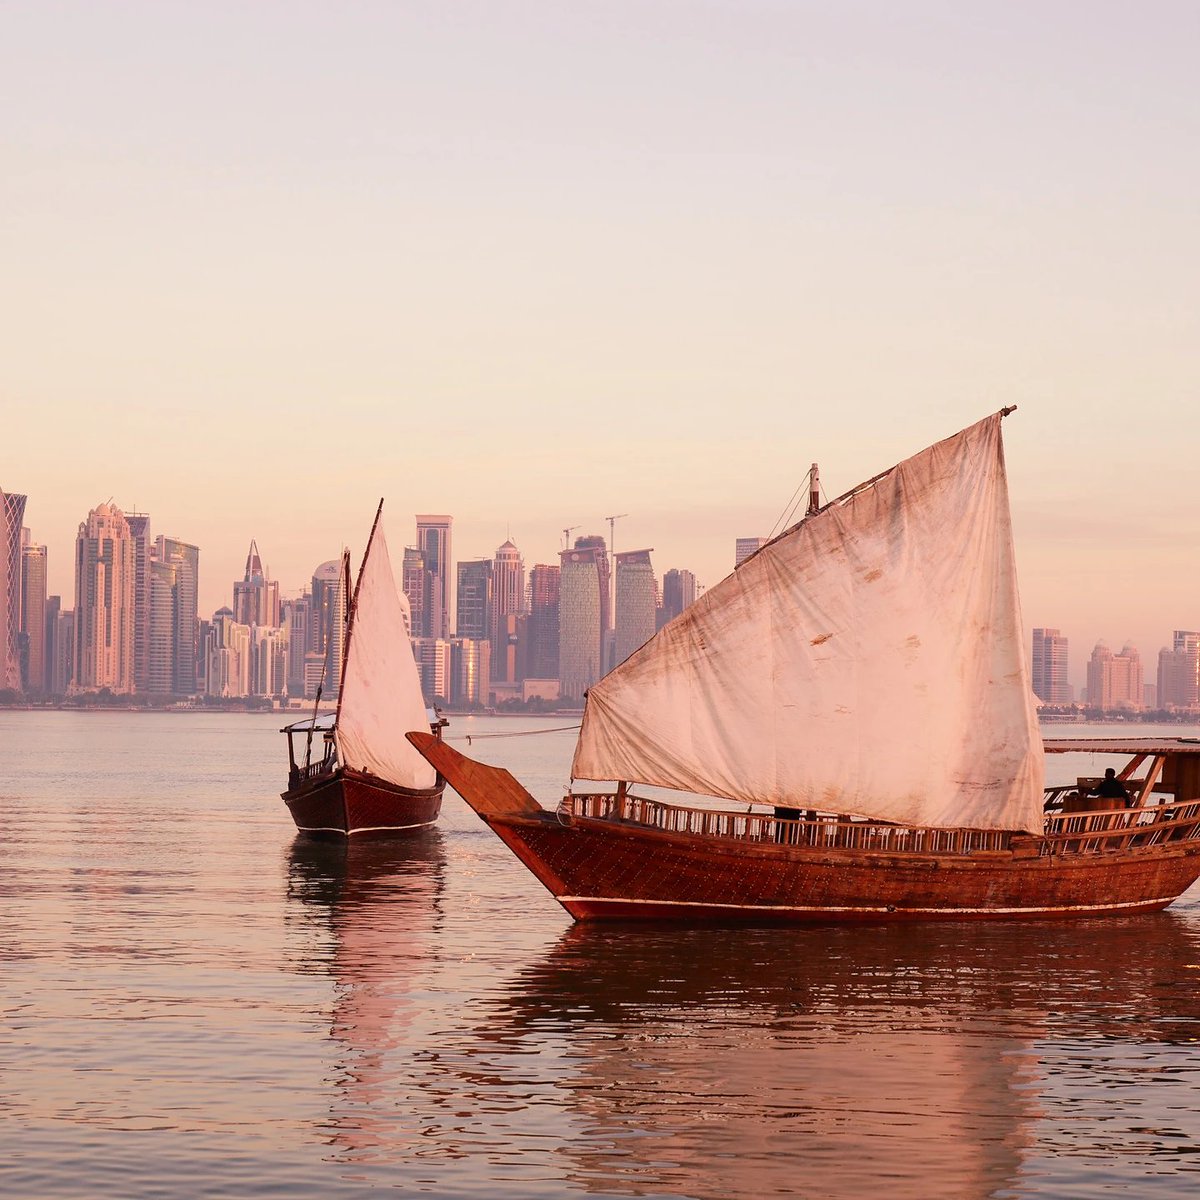 Explore the best things to do in Qatar. wanderlust.co.uk/content/best-t… From soaking up the culture at internationally acclaimed museums to cruising the Corniche on a traditional wooden dhow, #Qatar is one of the Gulf region's most exciting destinations.